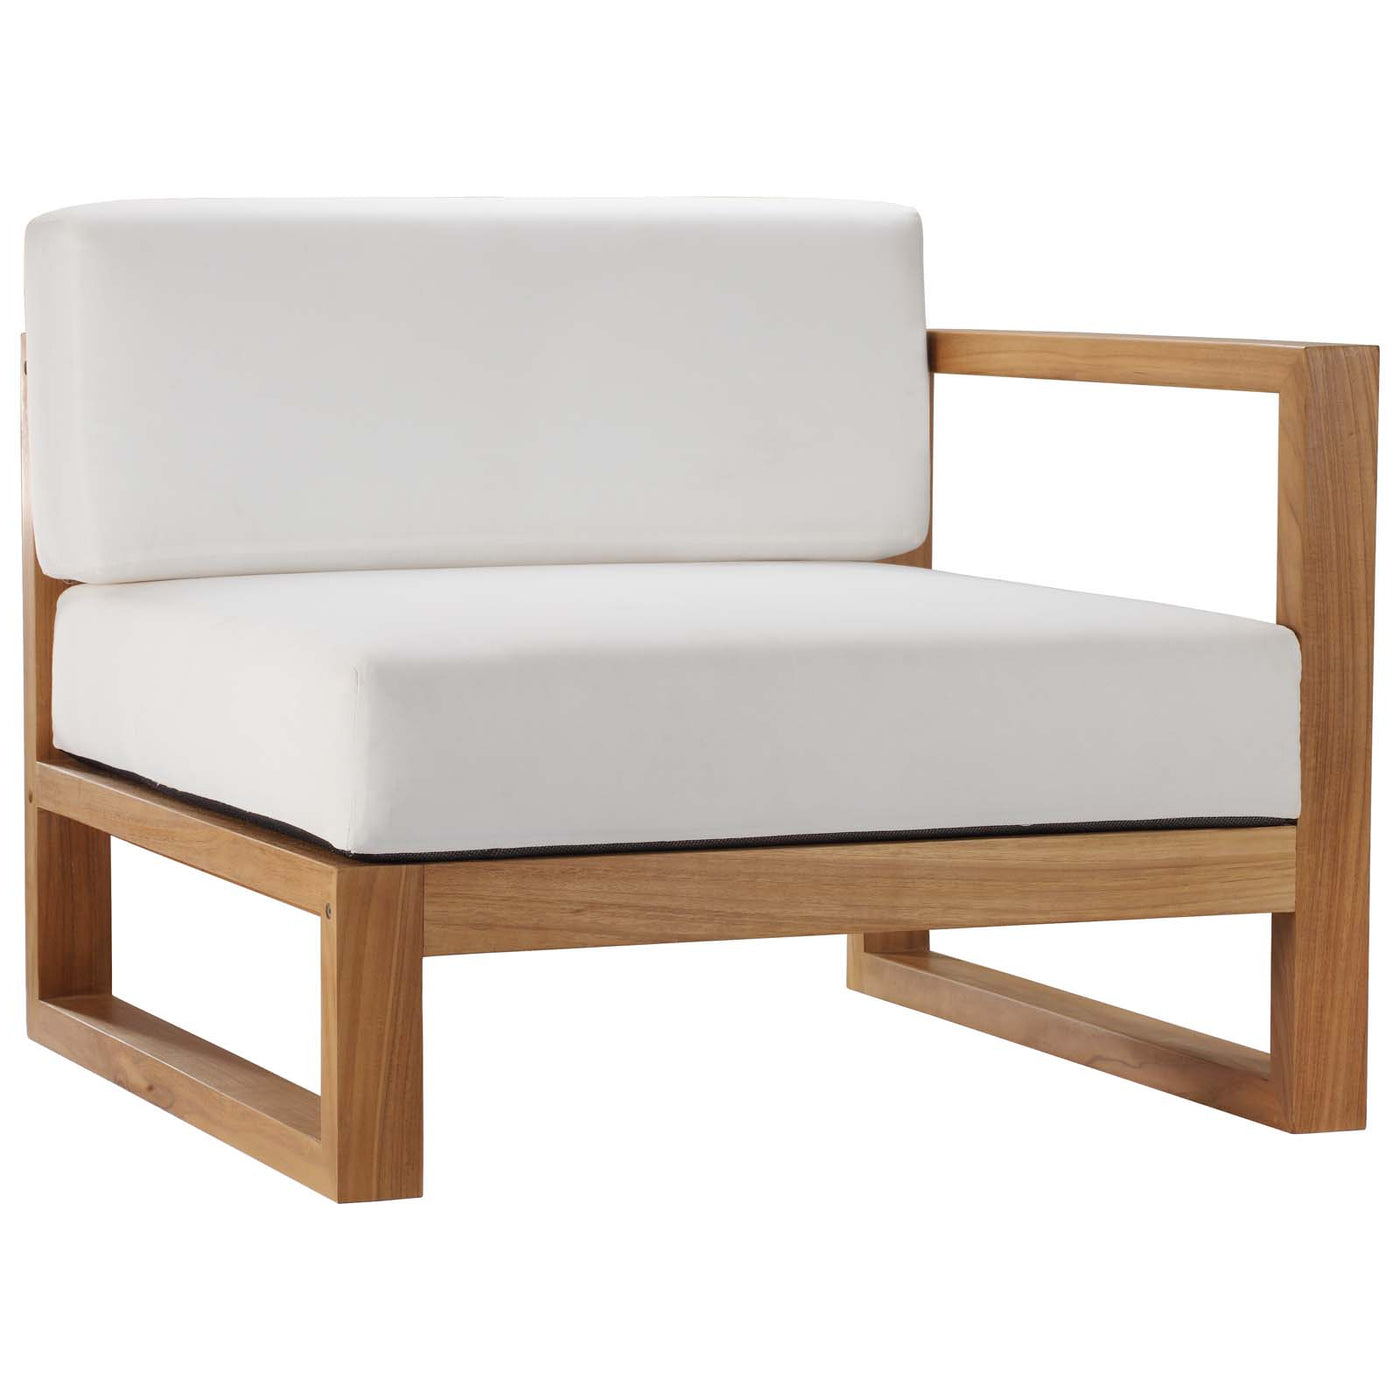 Upland Outdoor Patio Right-Arm Chair